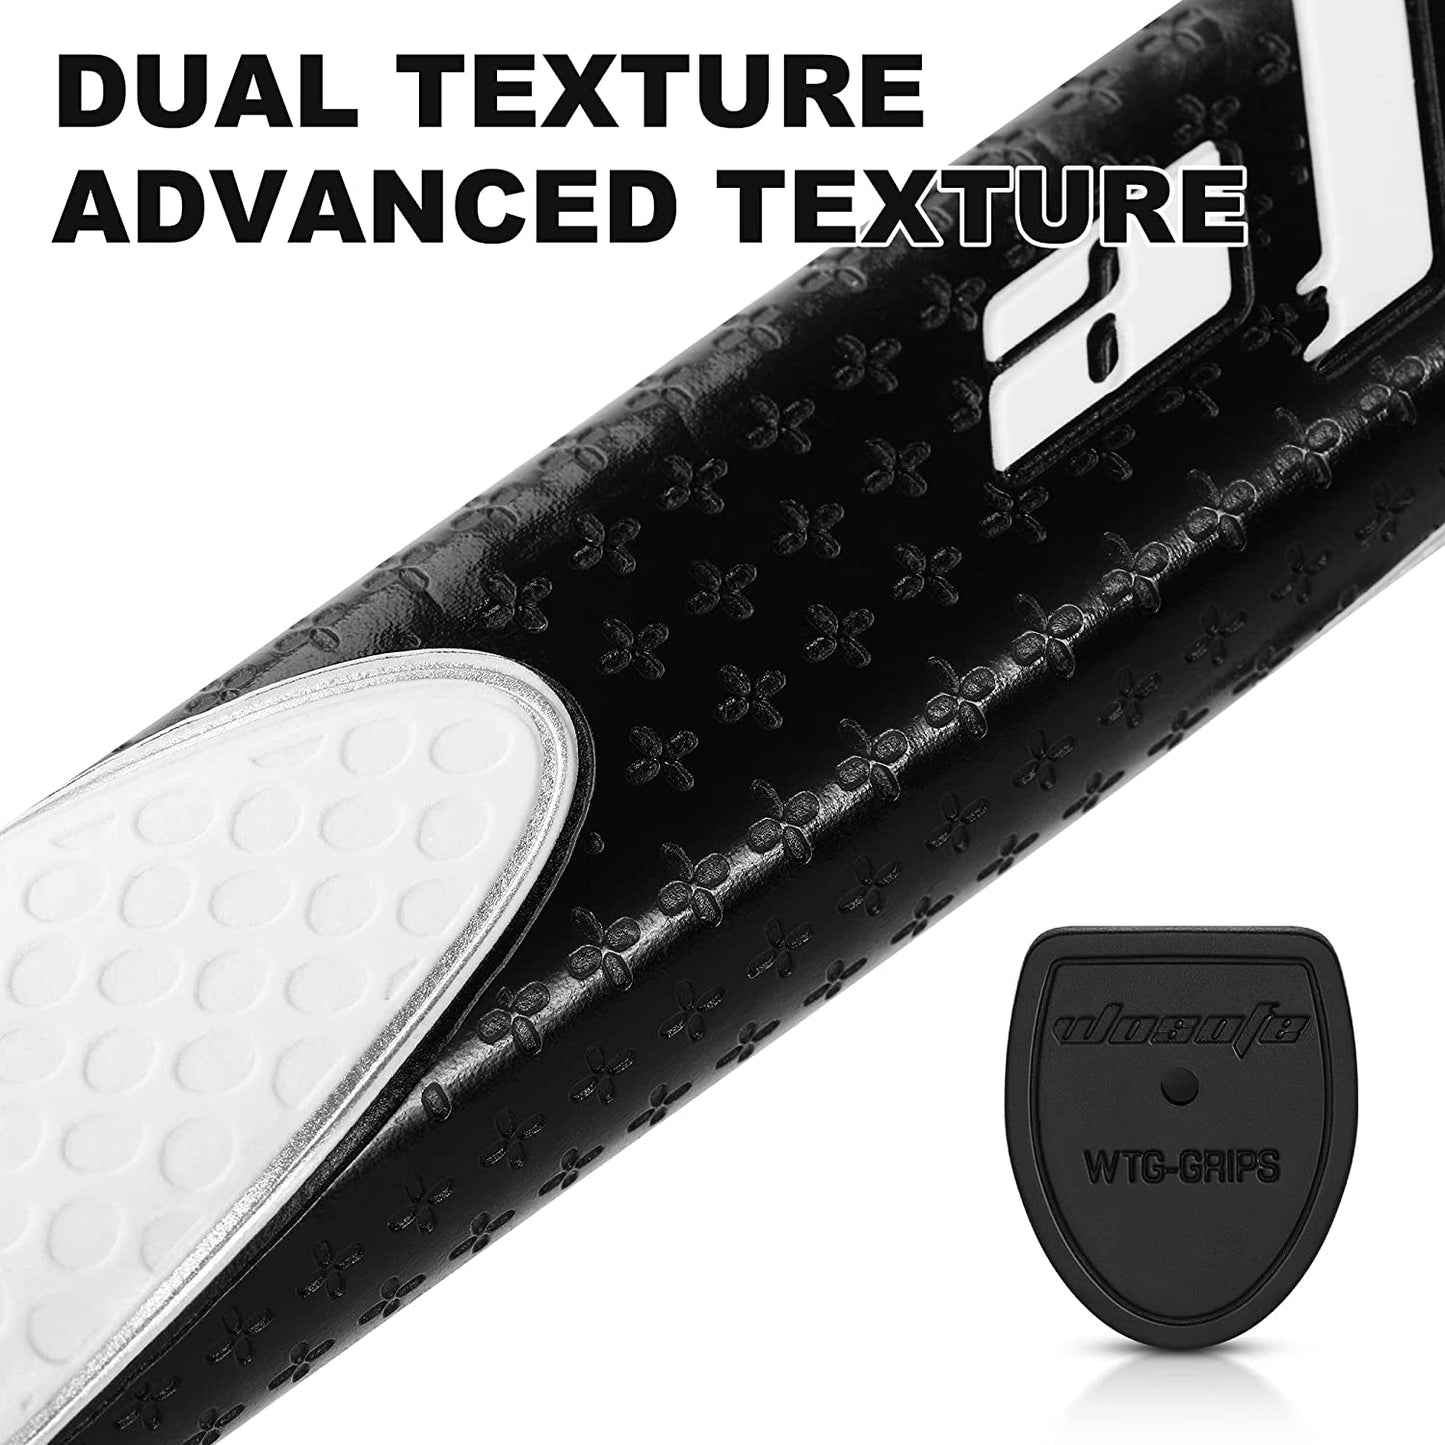 Wosofe Golf Putter Grip 87g Midsize Non Slip PU Lightweight Advanced Surface Texture Extreme Grip Comfort Non-Slip 6 Colors 2 double sided tape